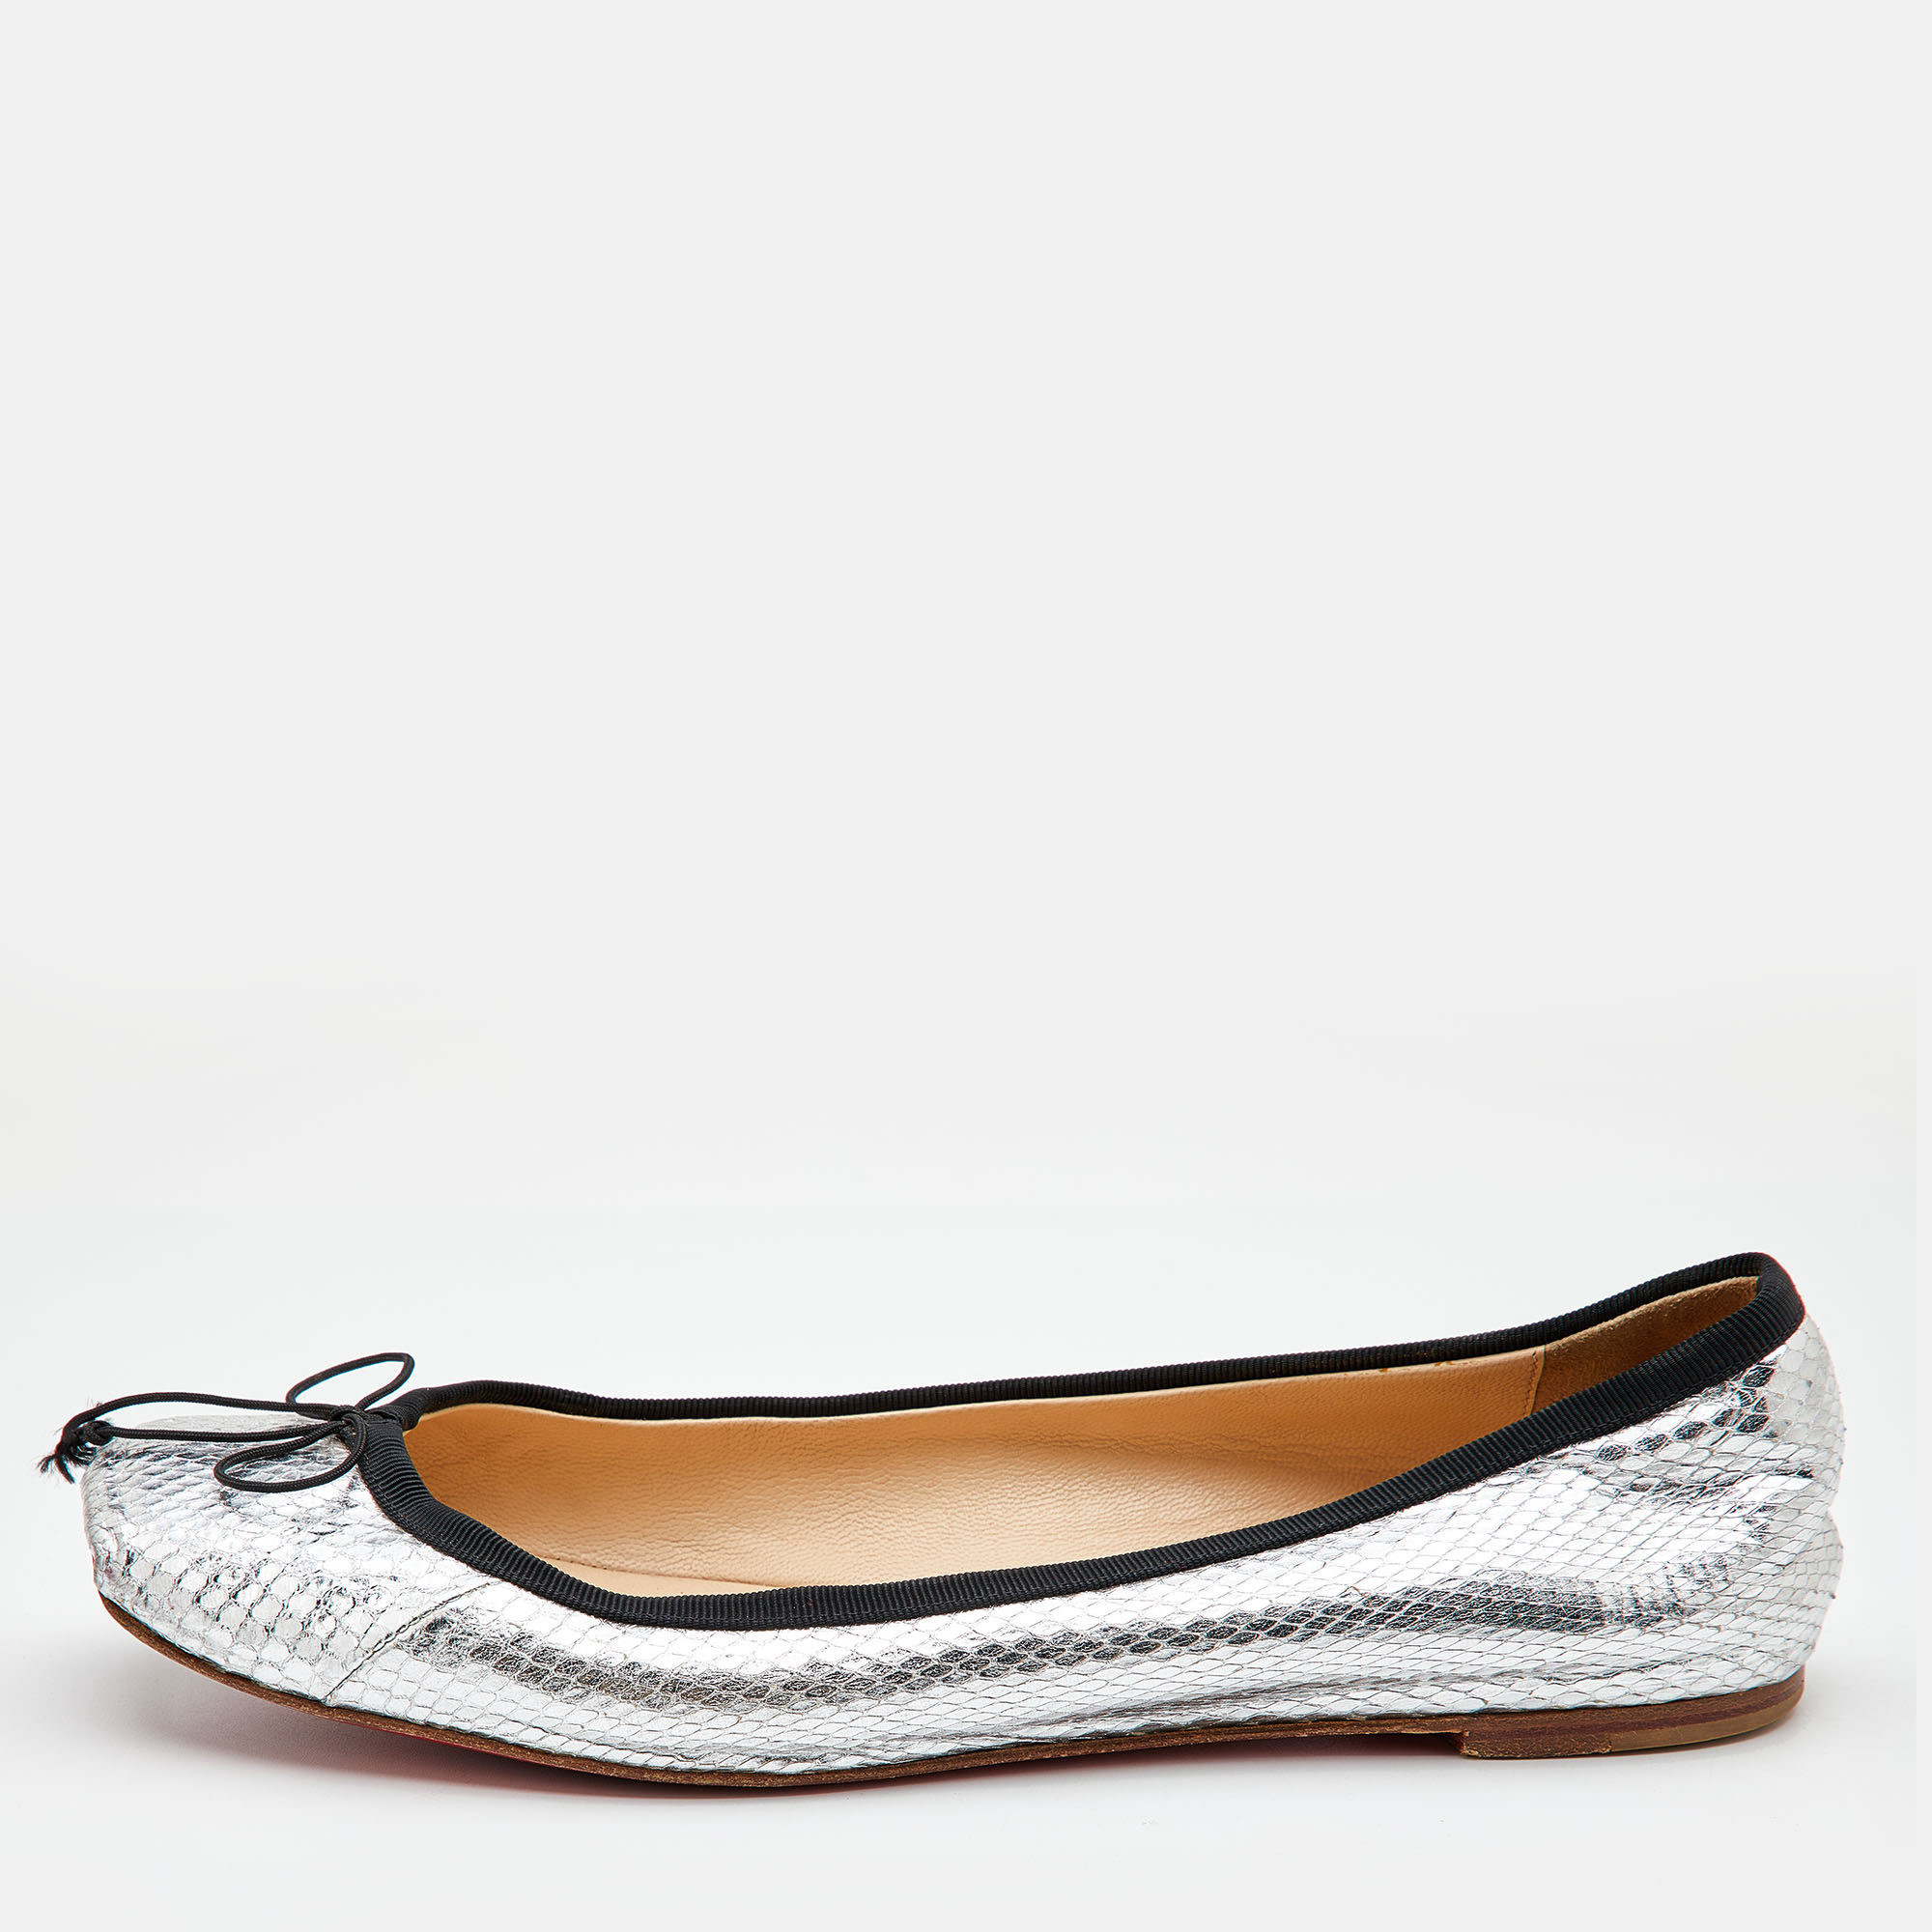 Pre-owned Christian Louboutin Metallic Silver Snakeskin Embossed Leather Ballet Flats Size 37.5